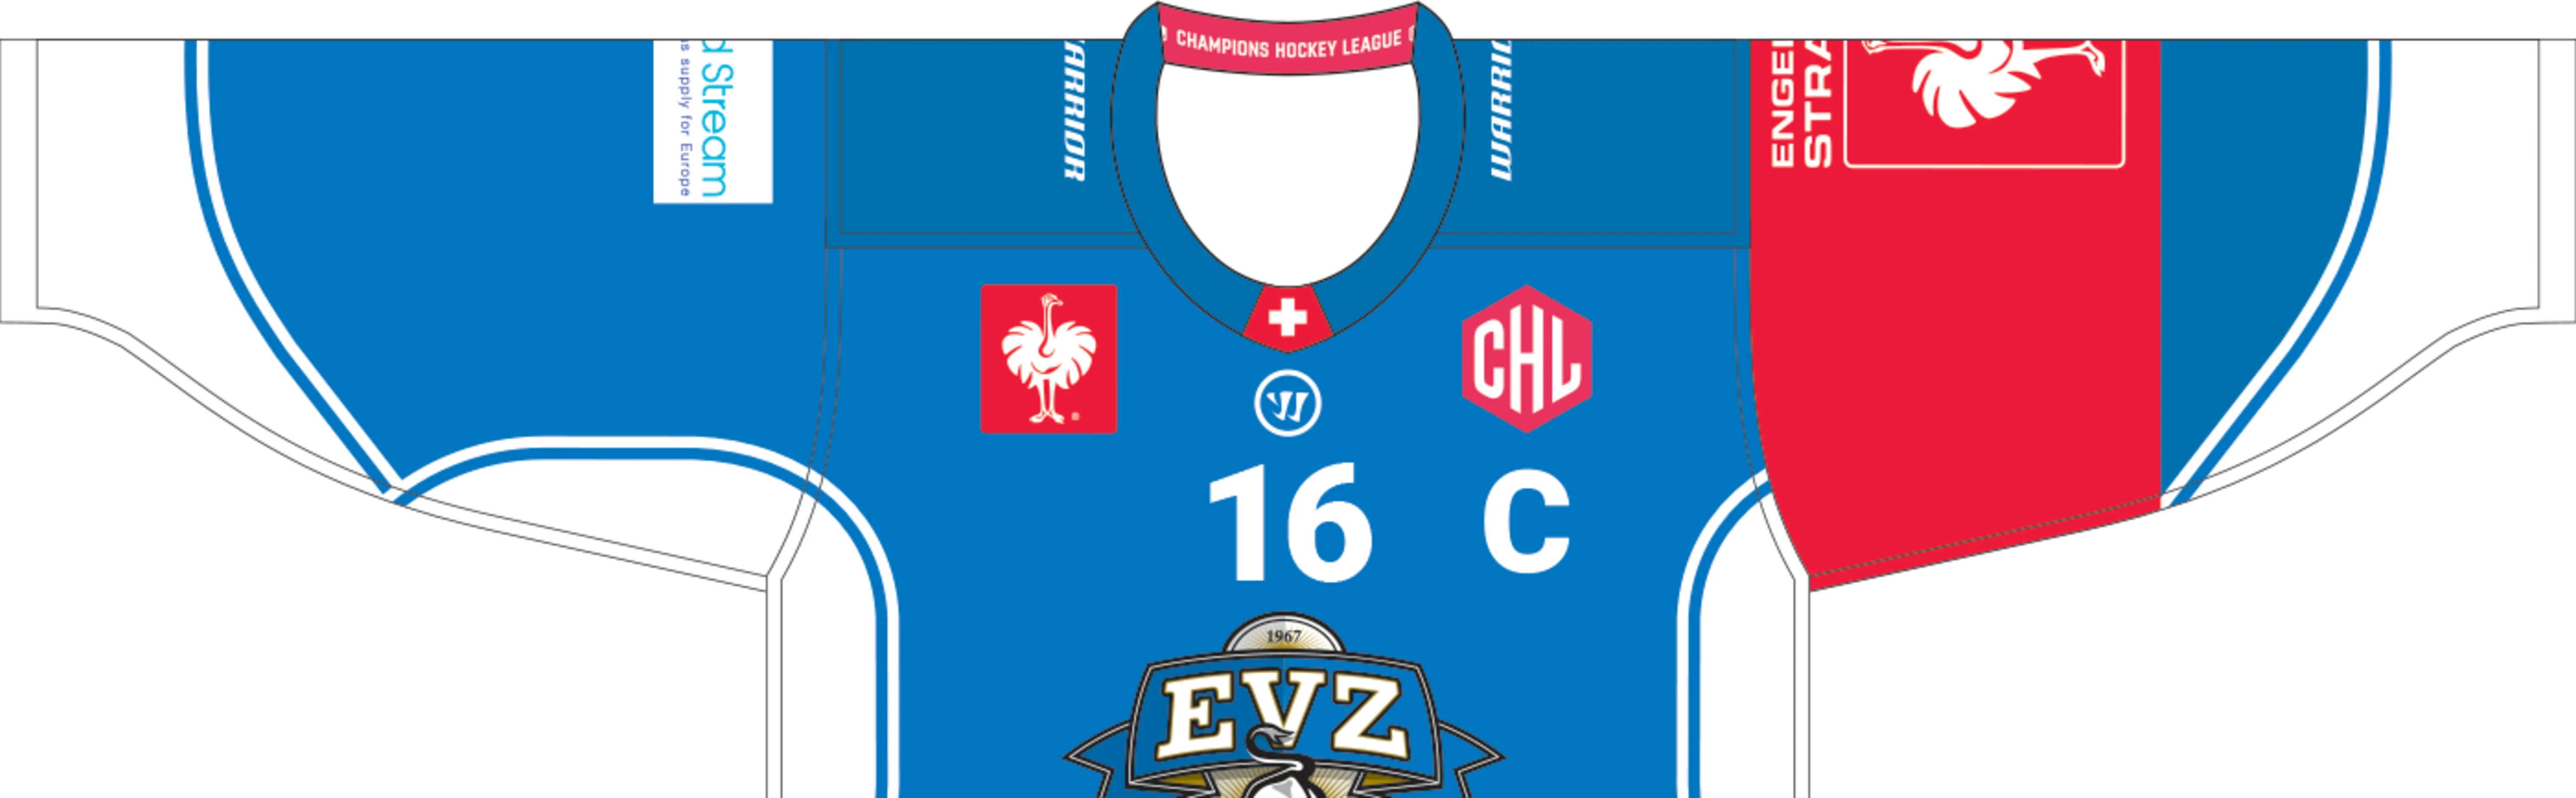 Special Edition Fan Jerseys for 2020/21 are now available in the Champions  Hockey League online store 👉www.shop-chl.com👈! Not only do you get a  cool, By Champions Hockey League